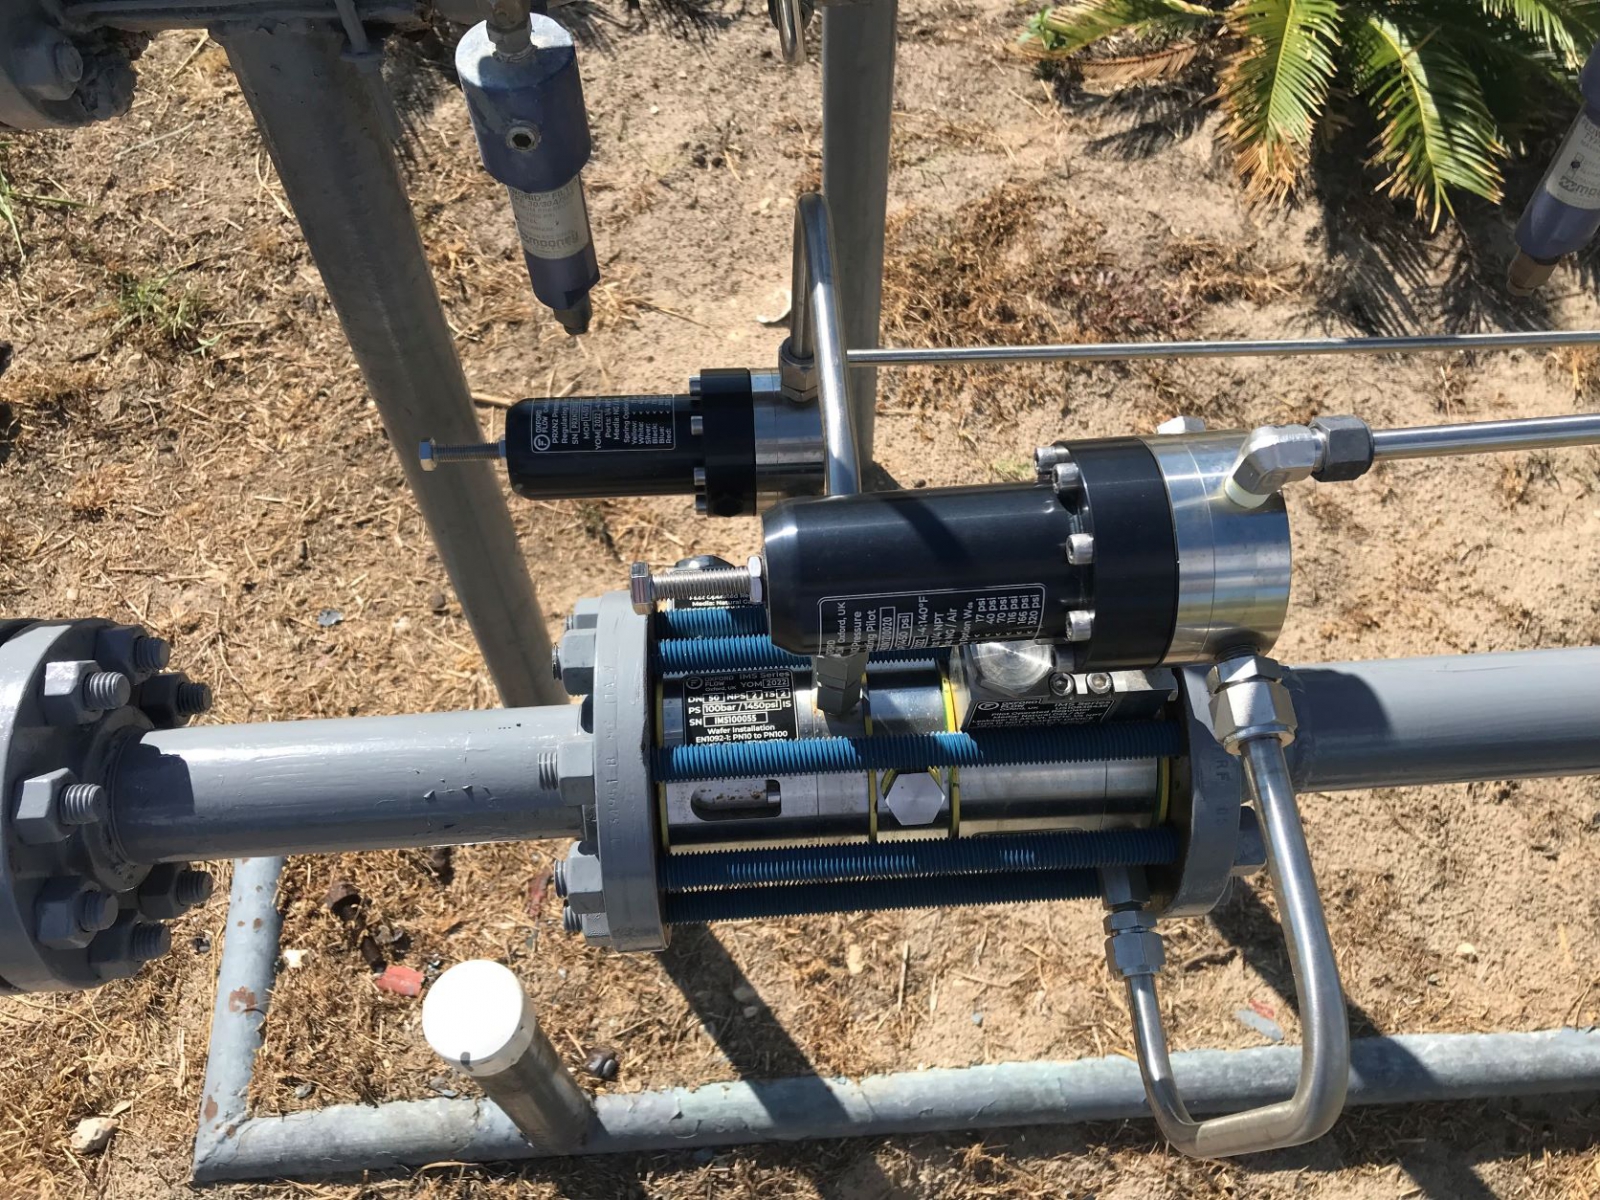 Two compact IM-S valves can bridge a small section of pipe in a ‘worker monitor system’